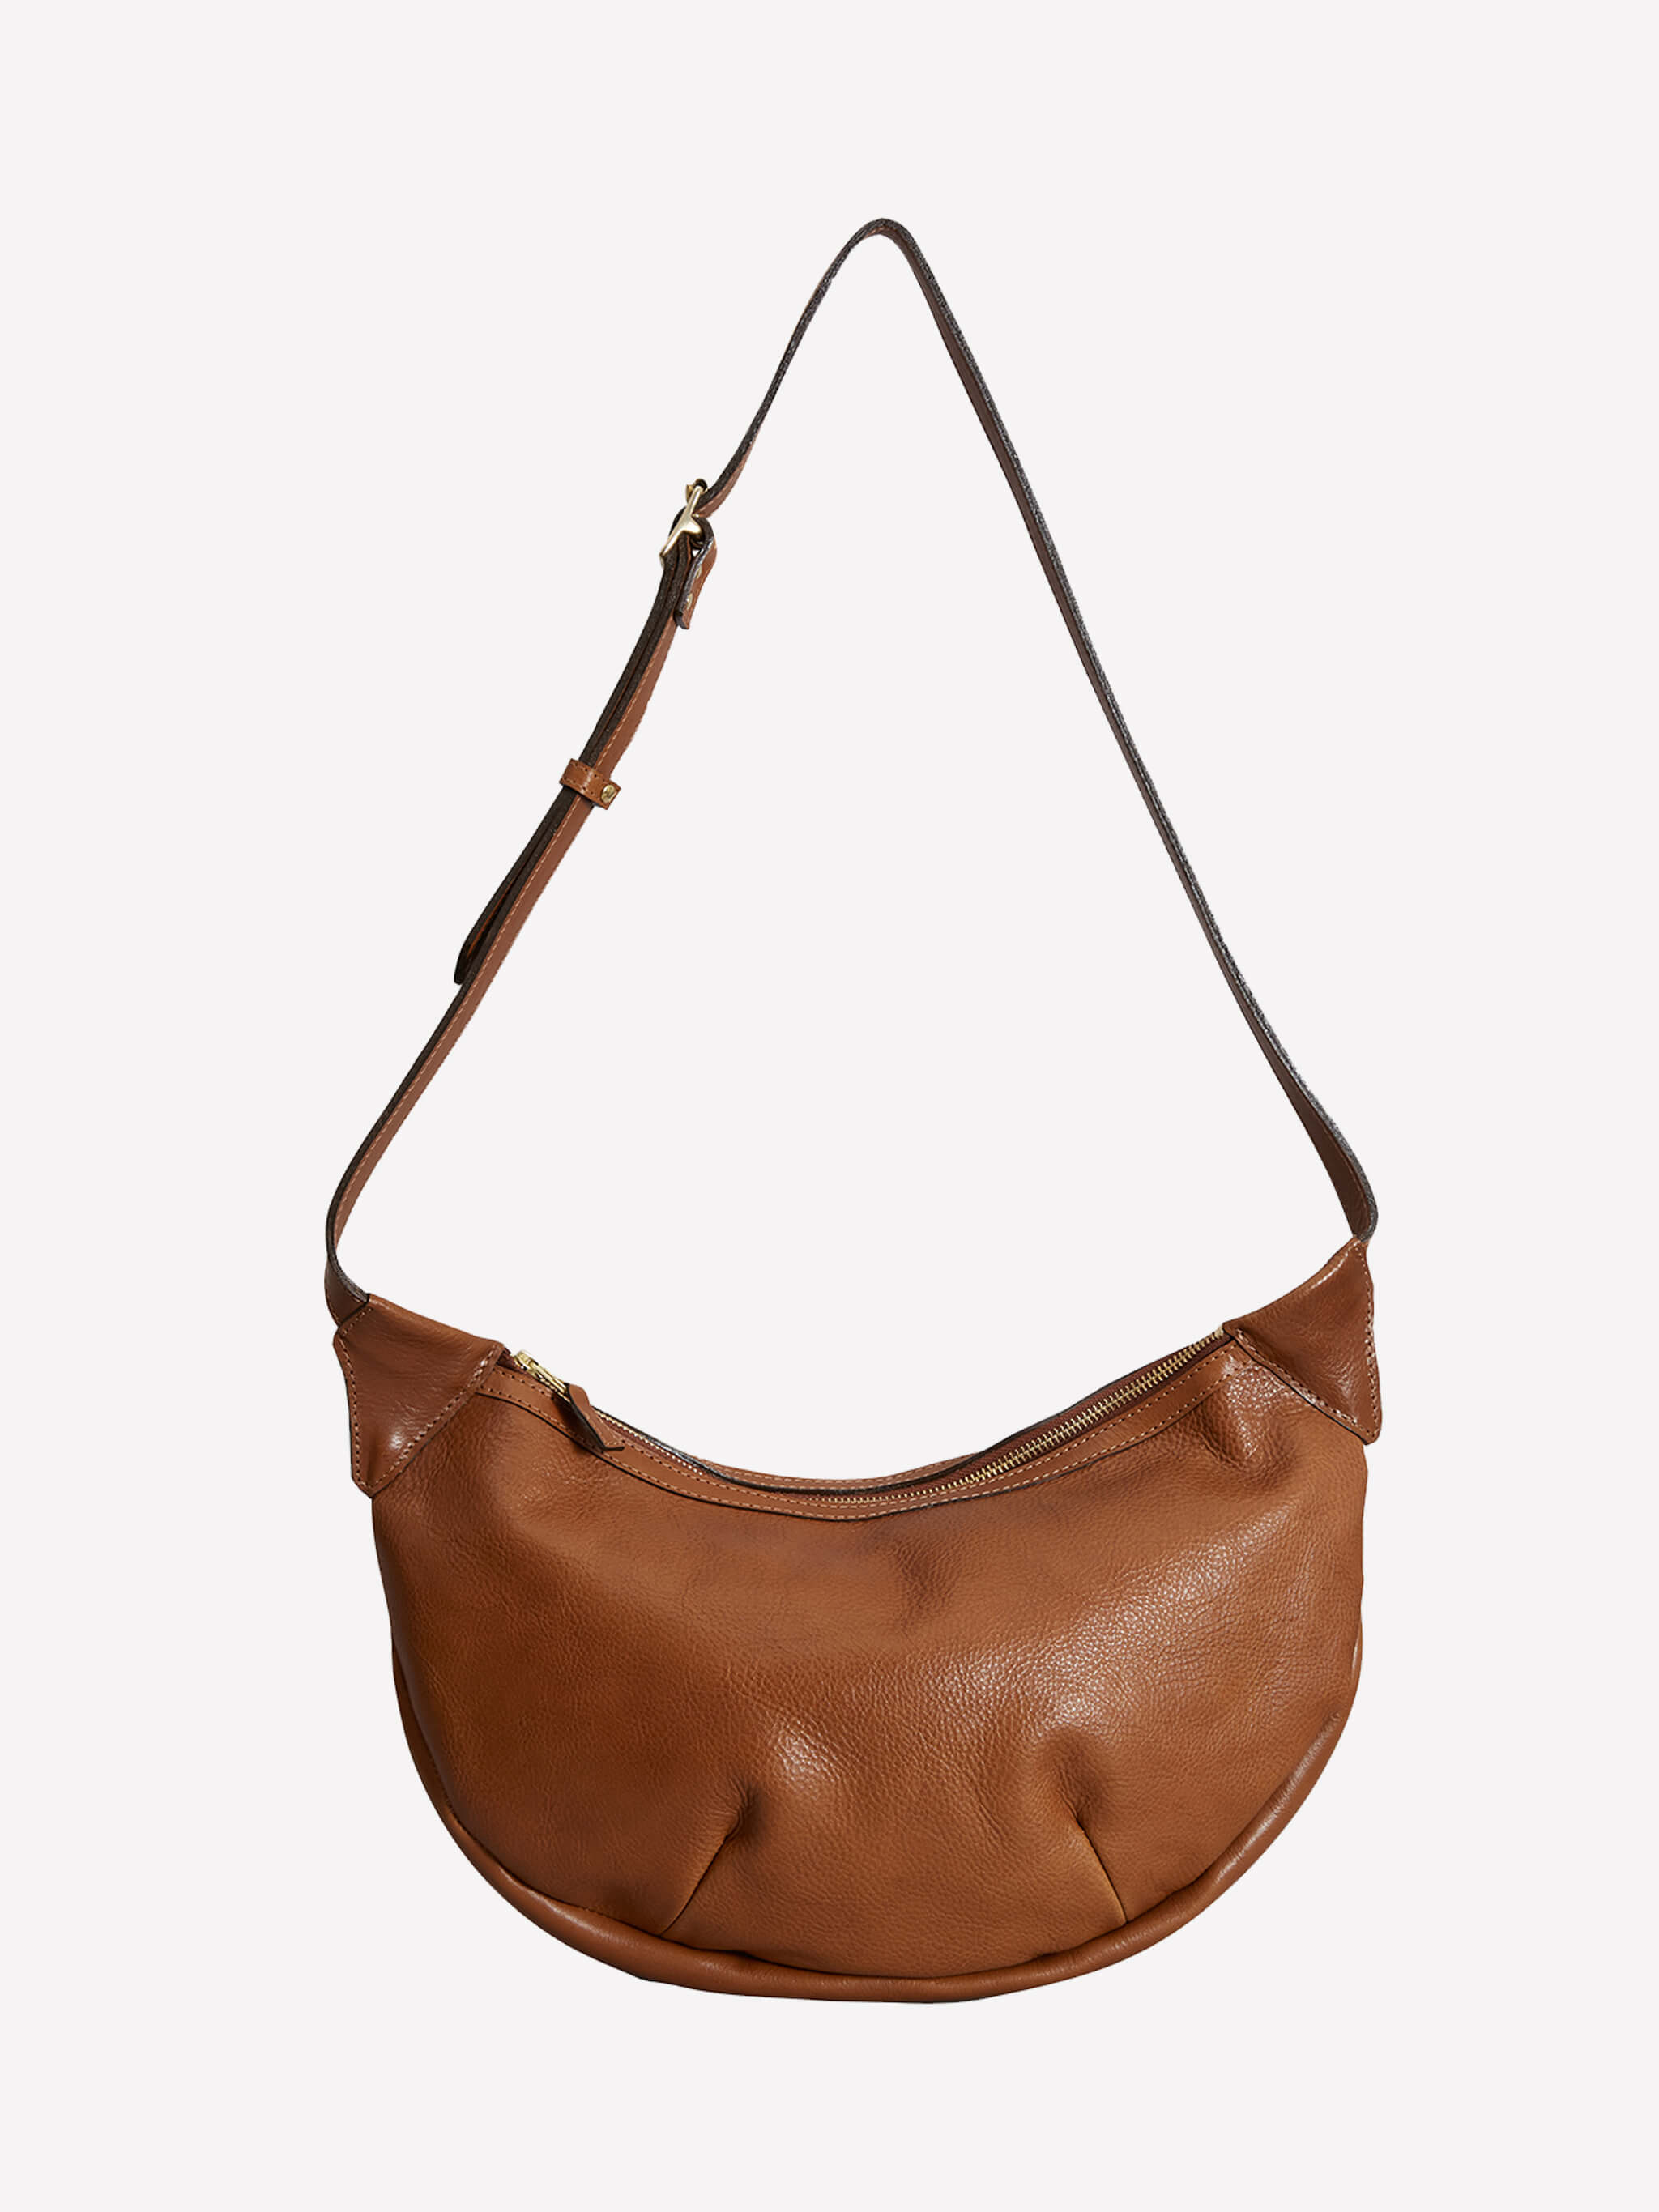 Mill Slouch Bag - Tan